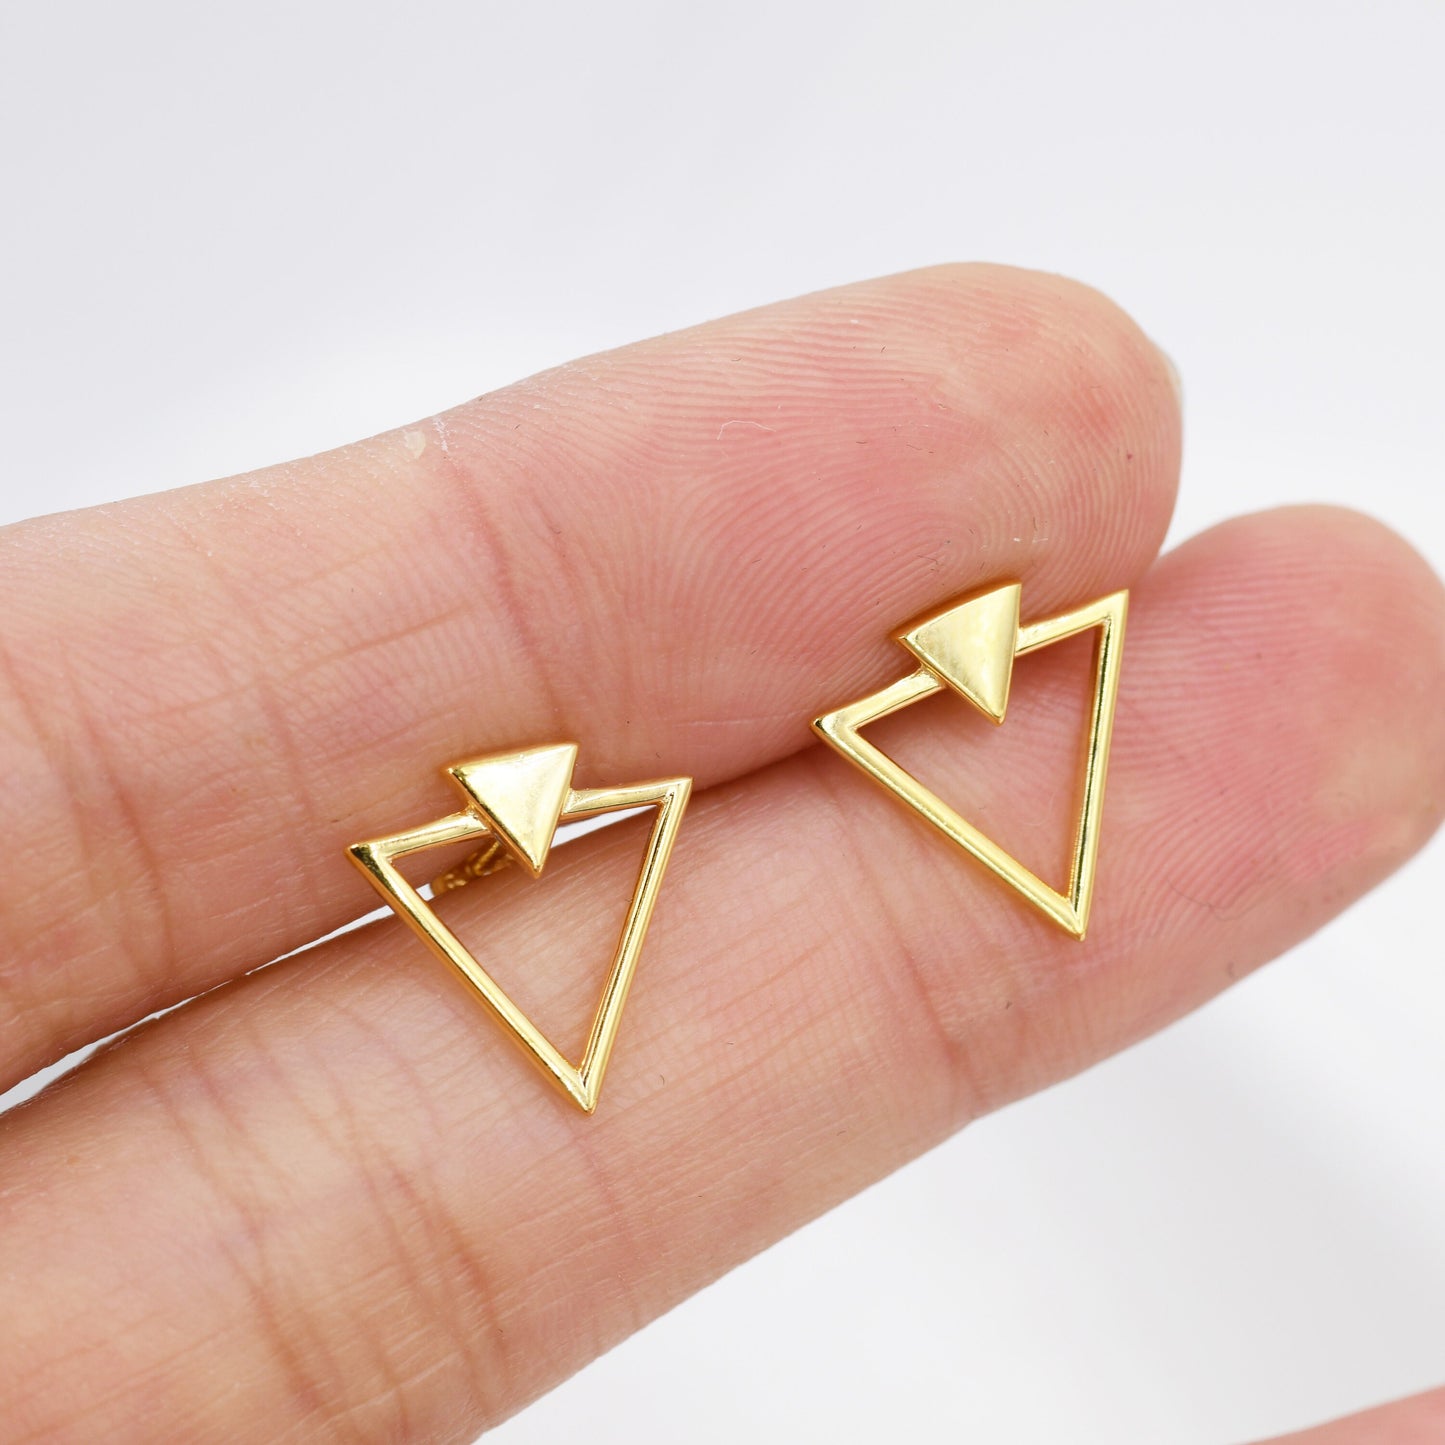 Sterling Silver Double Triangle Arrow Arrowhead Geometric Minimalist Stud Earrings, Silver, Gold or Rose Gold, Simple and Elegant Jewellery